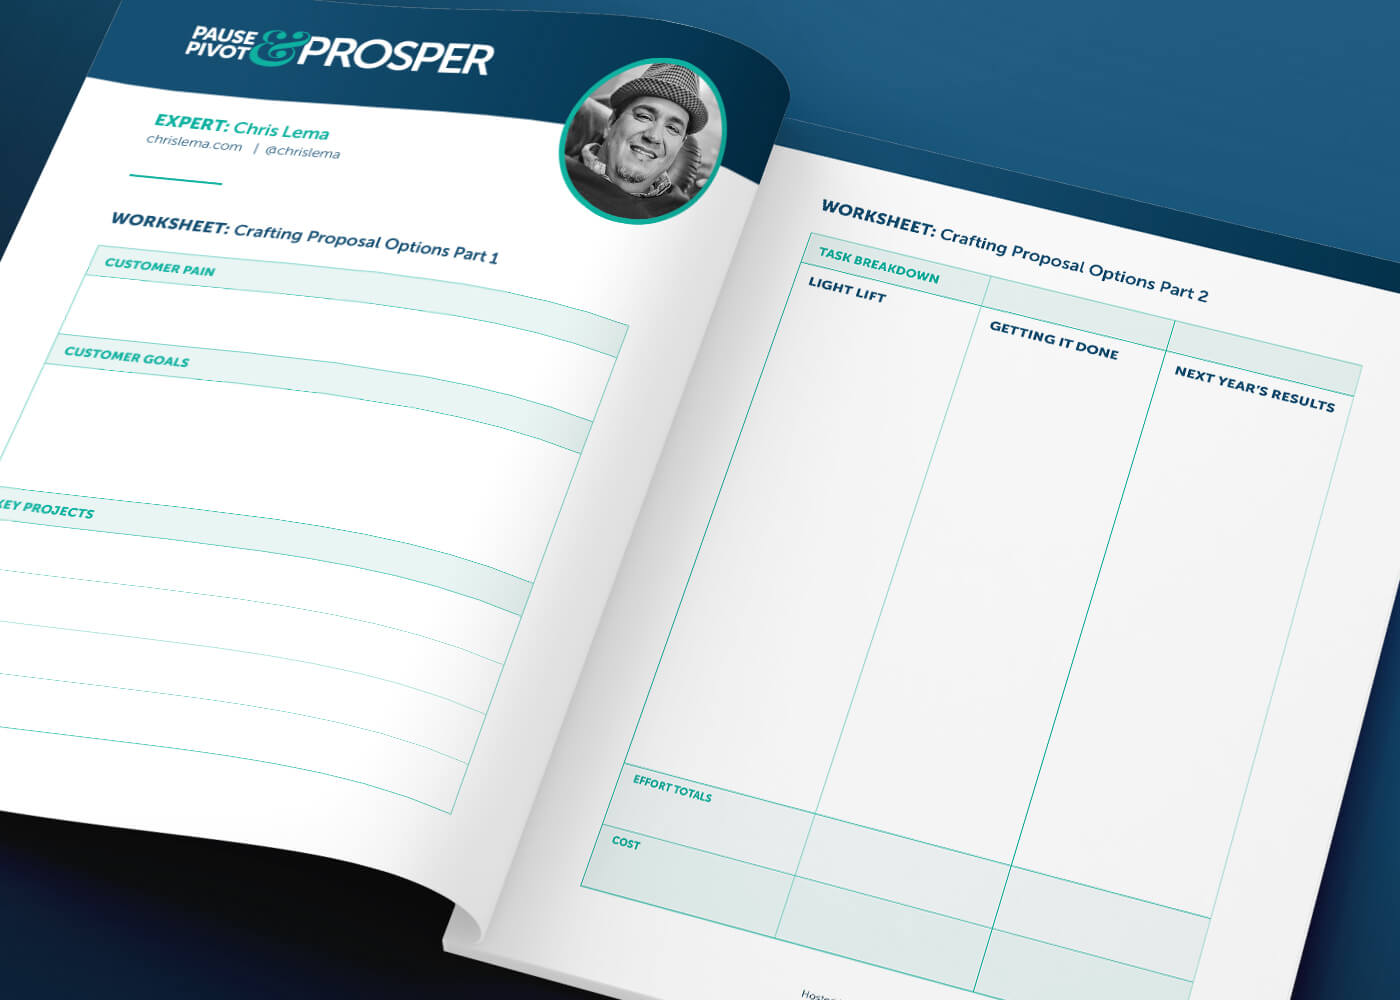 The design and layout of workbook pages for a virtual event